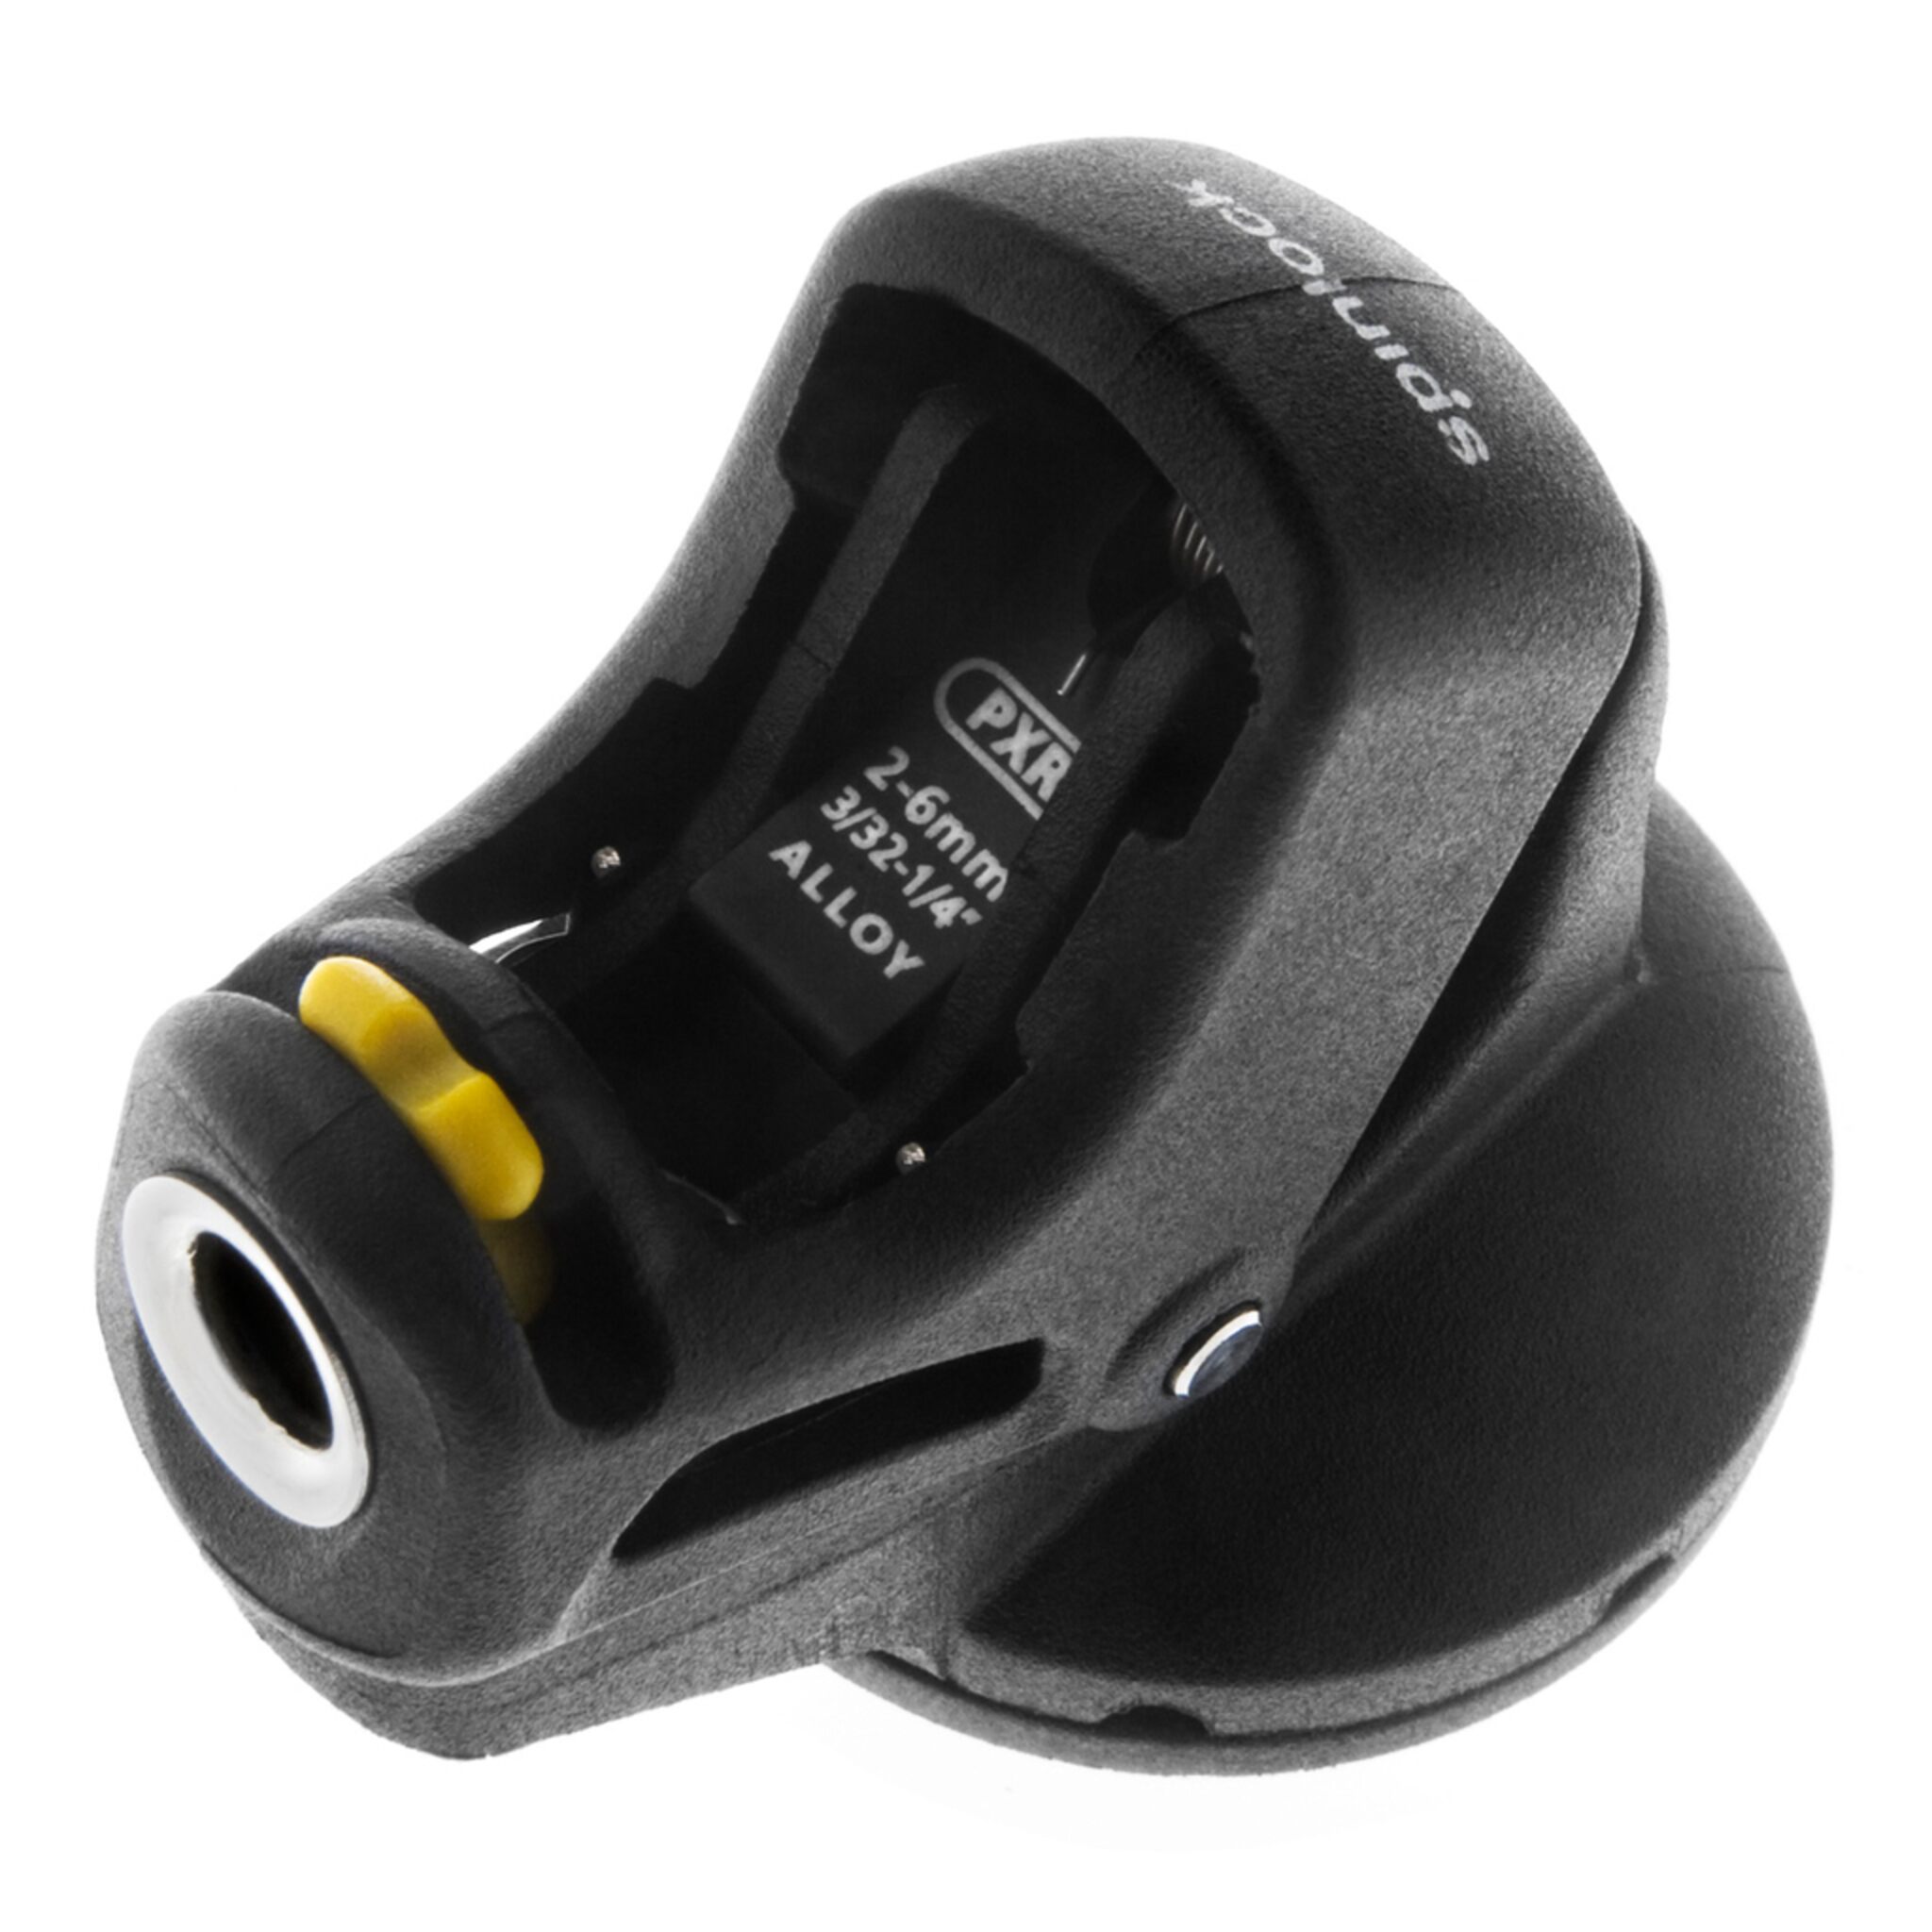 Spinlock 'PXR' power clamp with swivel base